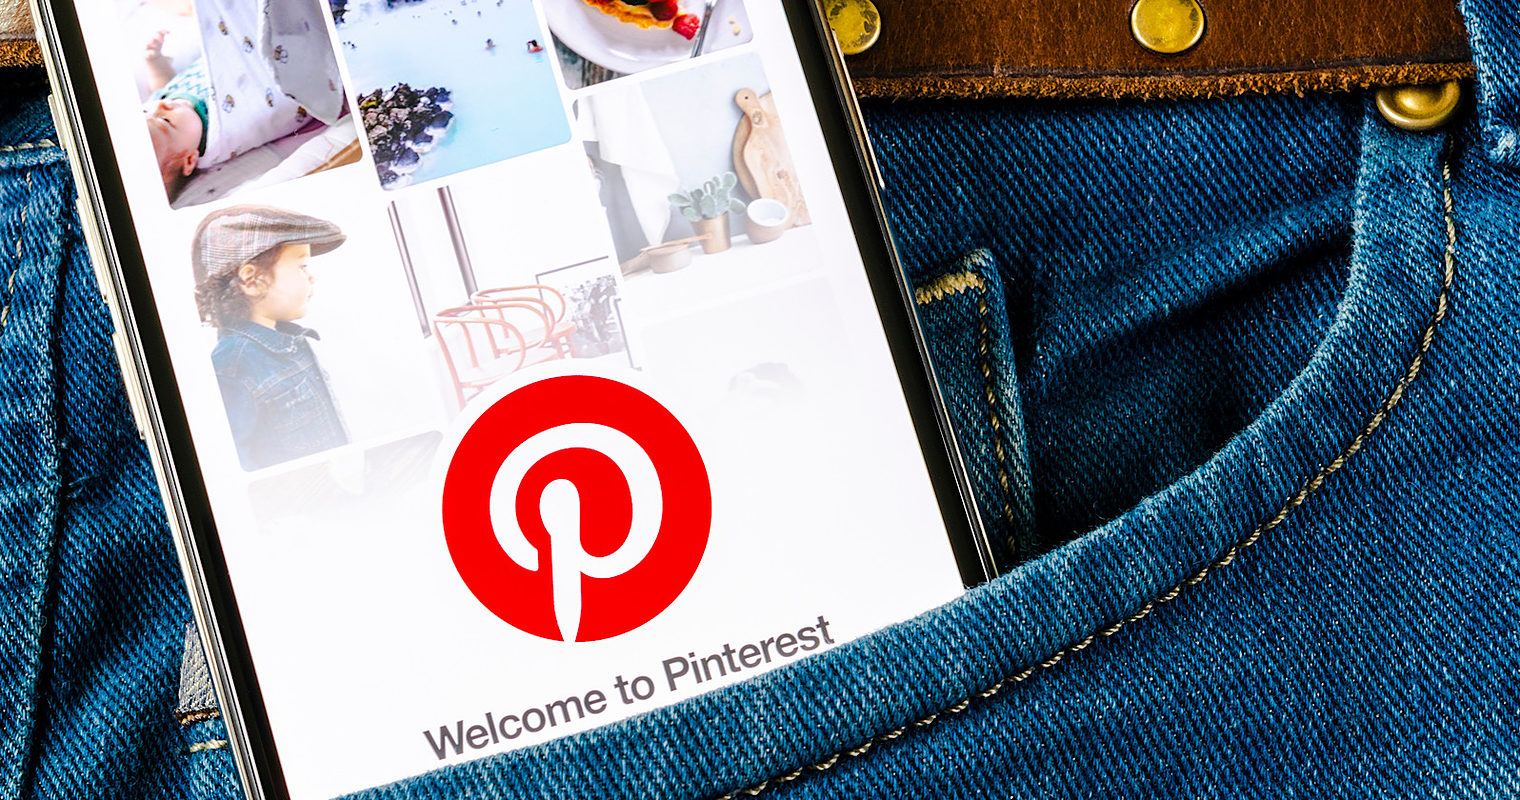 Pinterest Overtakes Snapchat in Popularity Among US Users